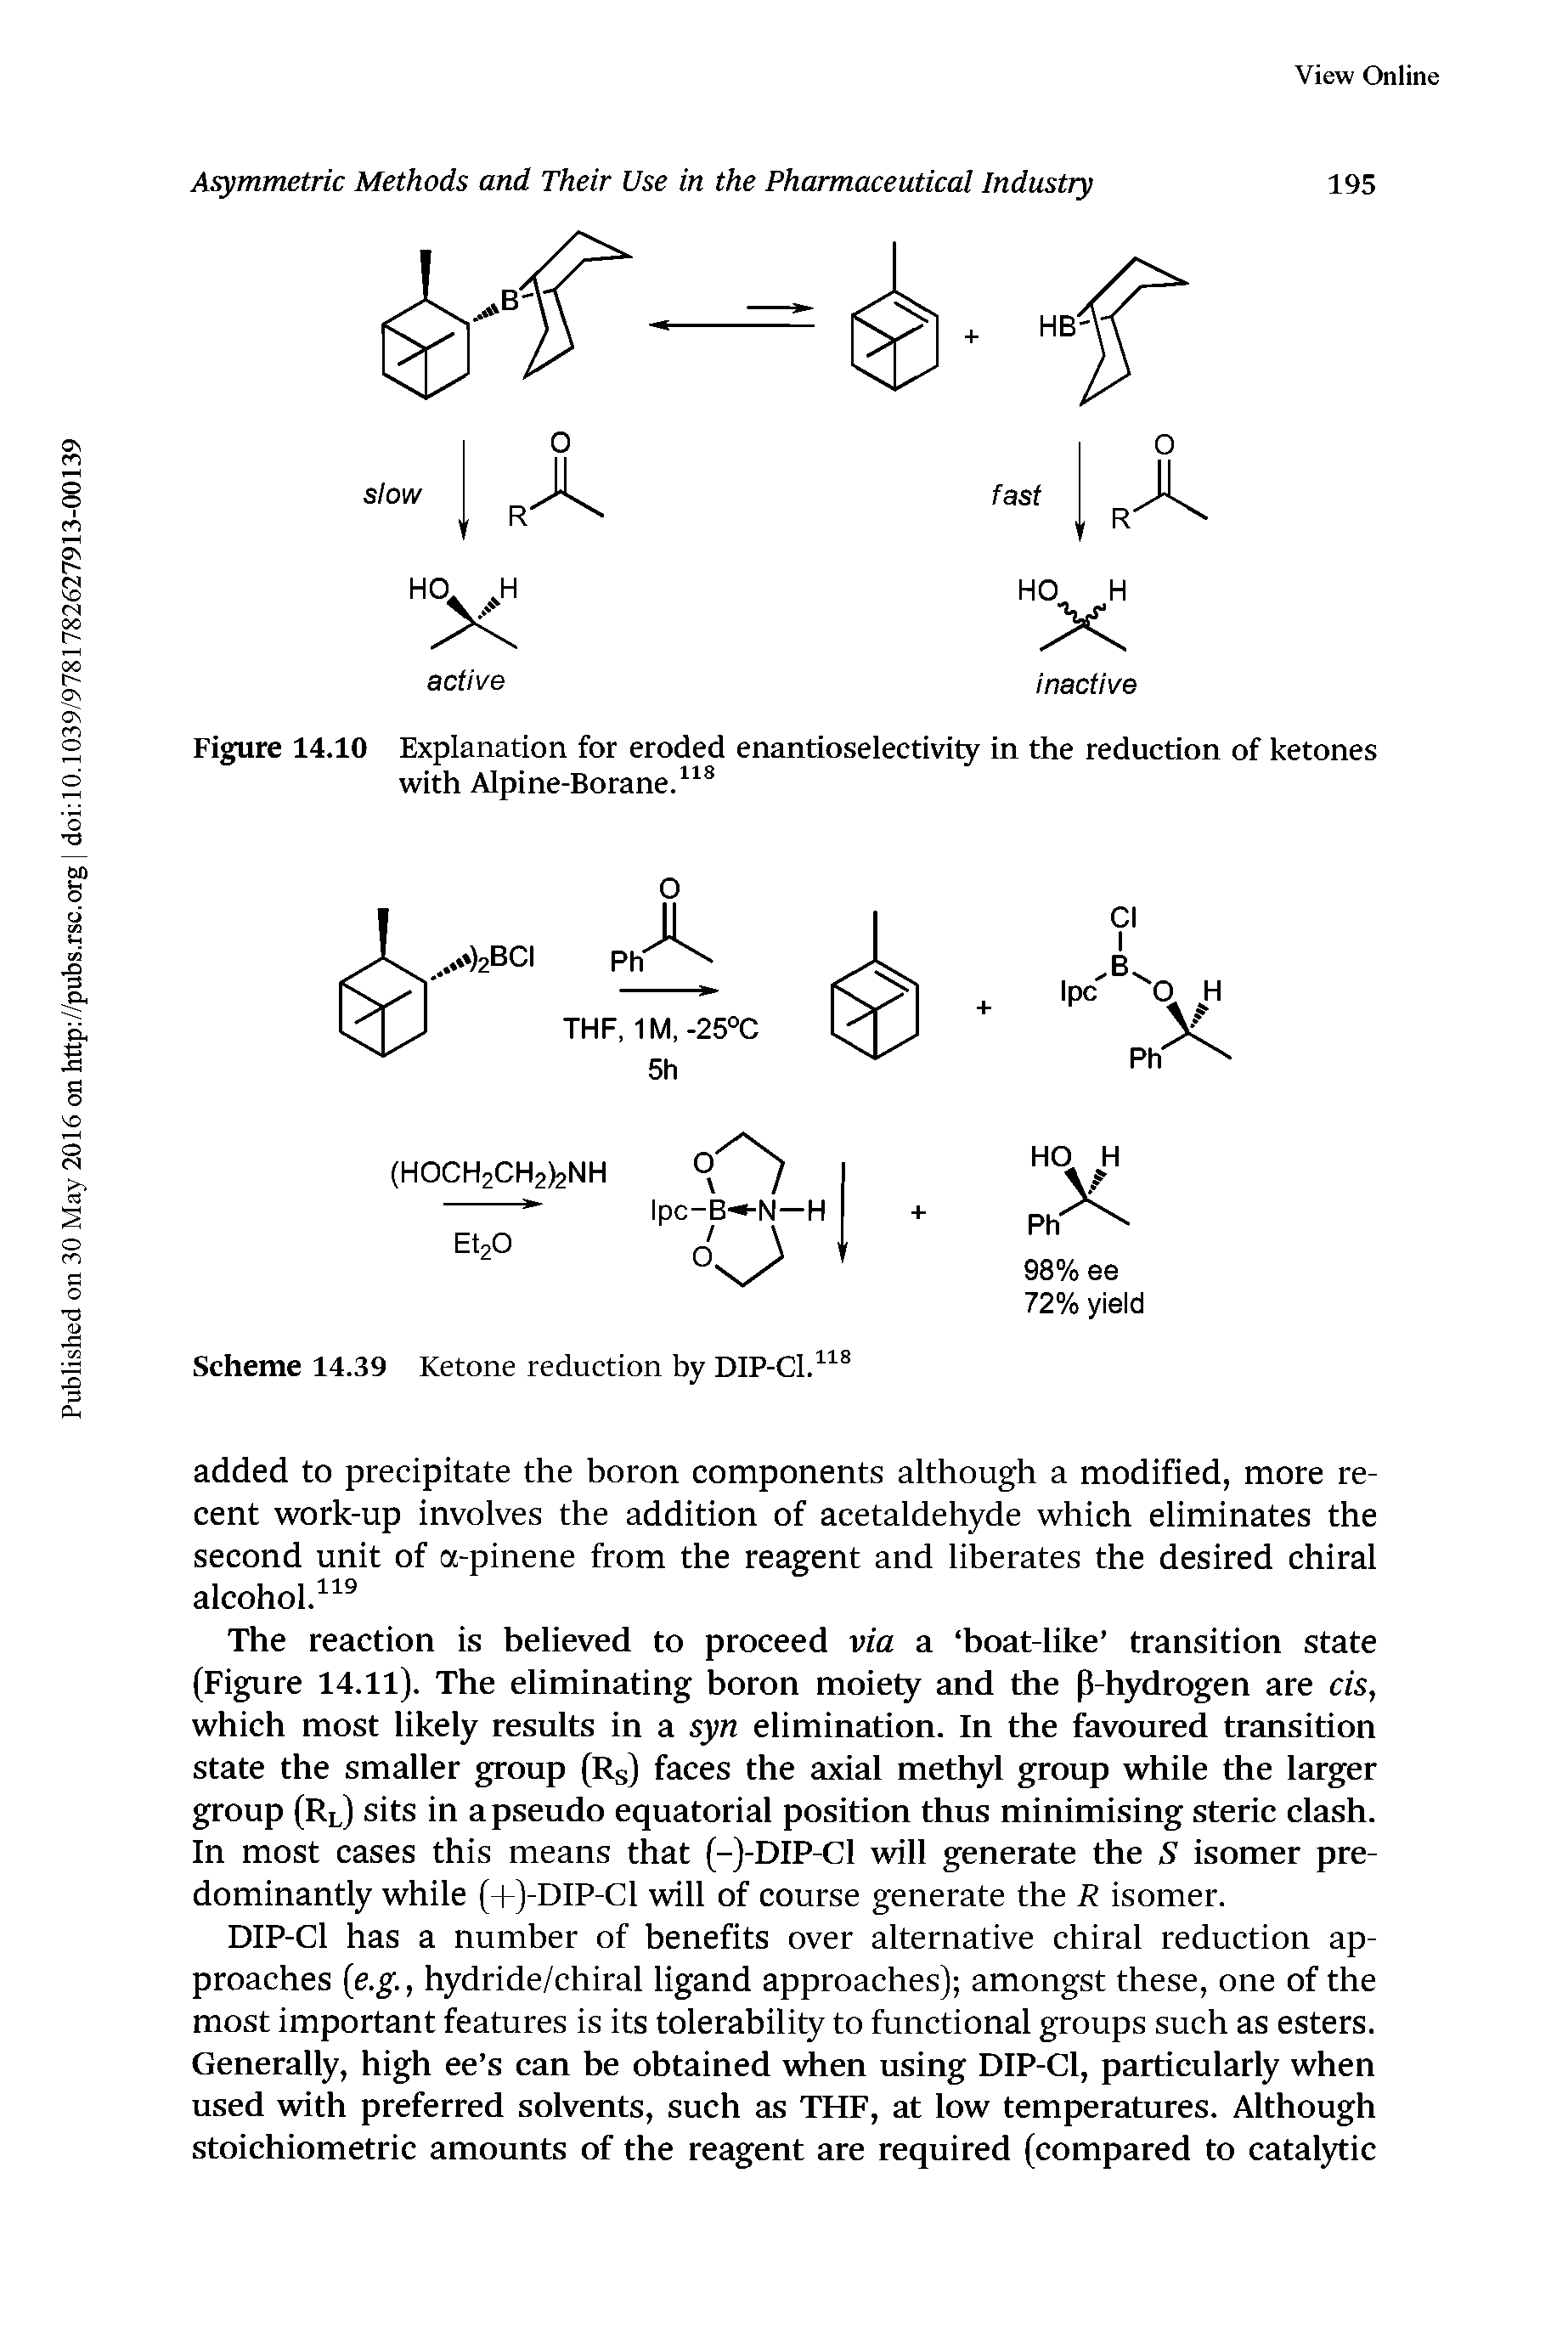 Figure 14.10 Explanation for eroded enantioselectivity in the reduction of ketones with Alpine-Borane. ...